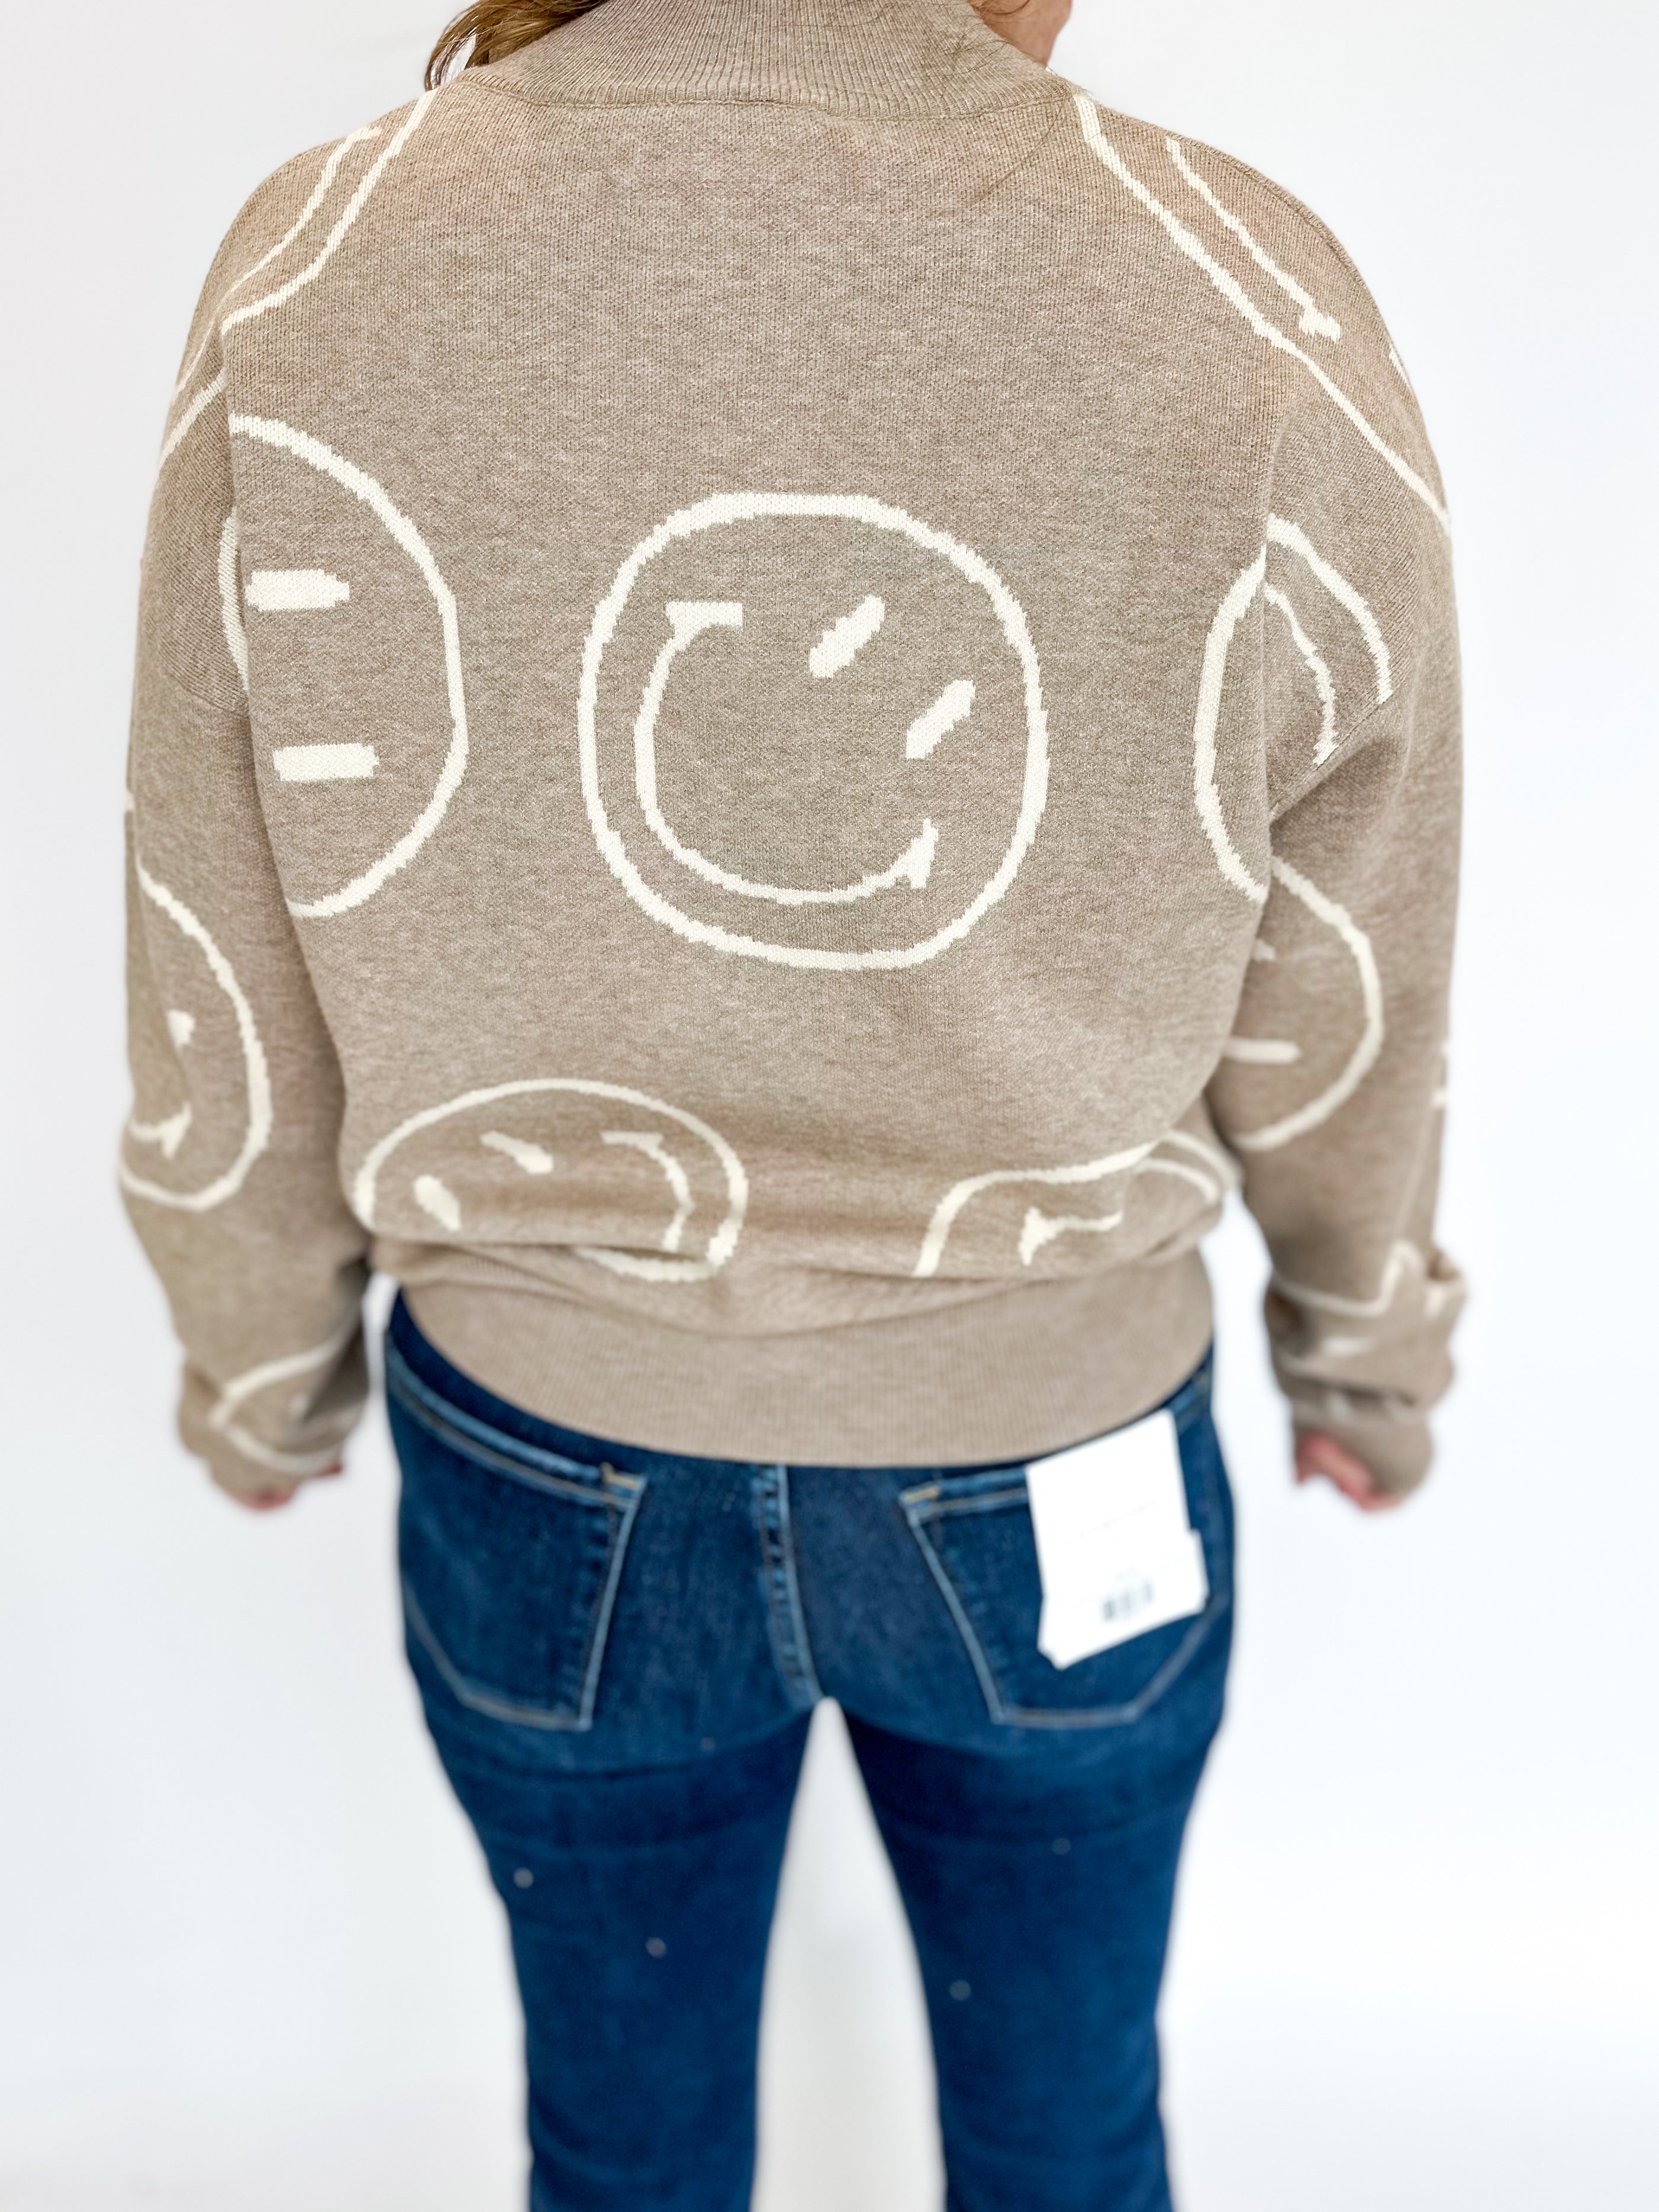 Smiley Pullover Sweater Top-230 Sweaters/Cardis-GILLI CLOTHING-July & June Women's Fashion Boutique Located in San Antonio, Texas